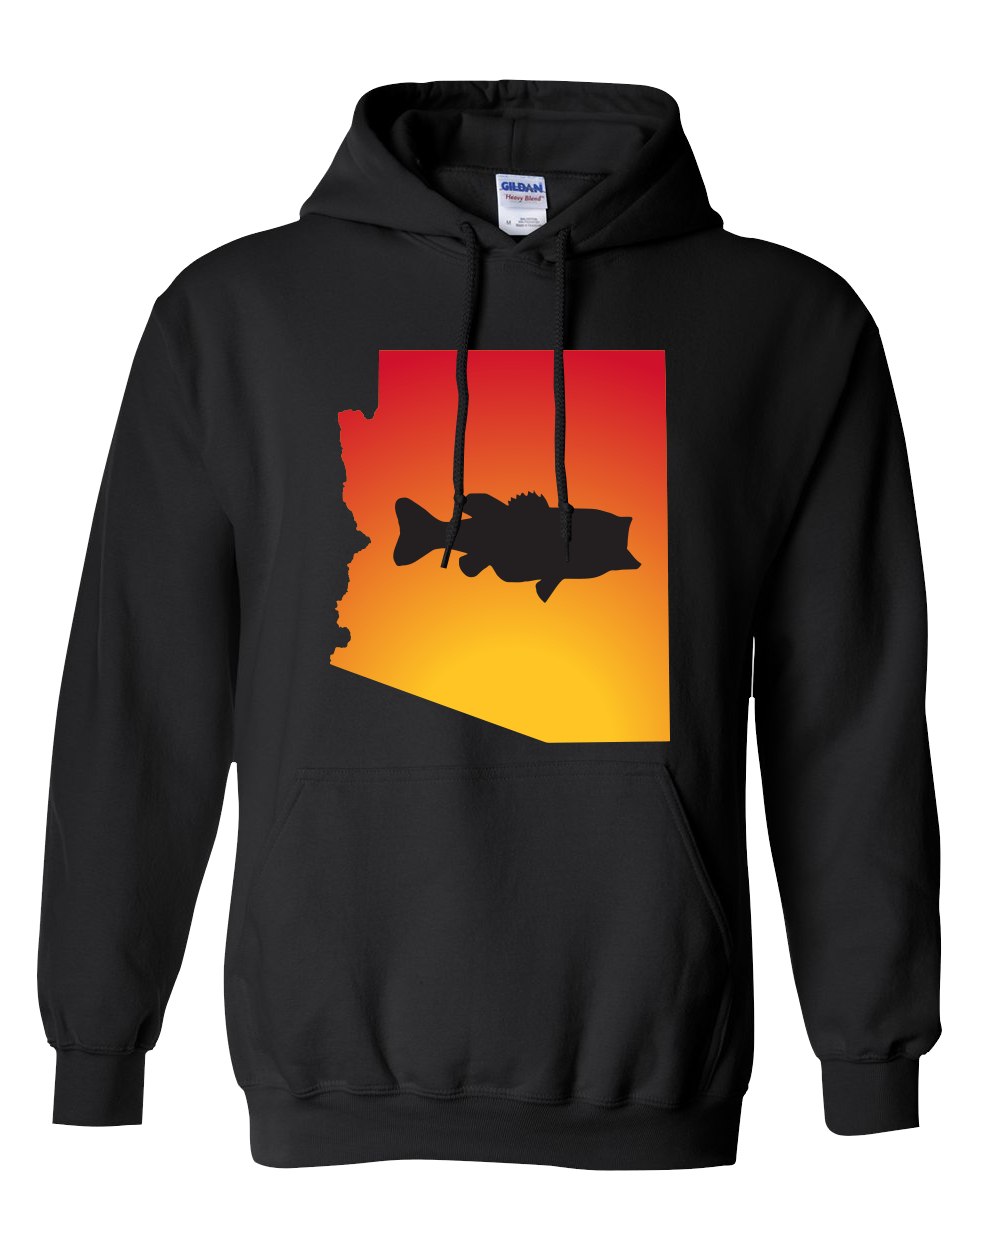 Pullover Hooded Sweatshirt Arizona Black Large Mouth Bass Vibrant Design High Quality Tight Knit Ring Spun Low Maintenance Cotton Printed With The Newest Available Color Transfer Technology